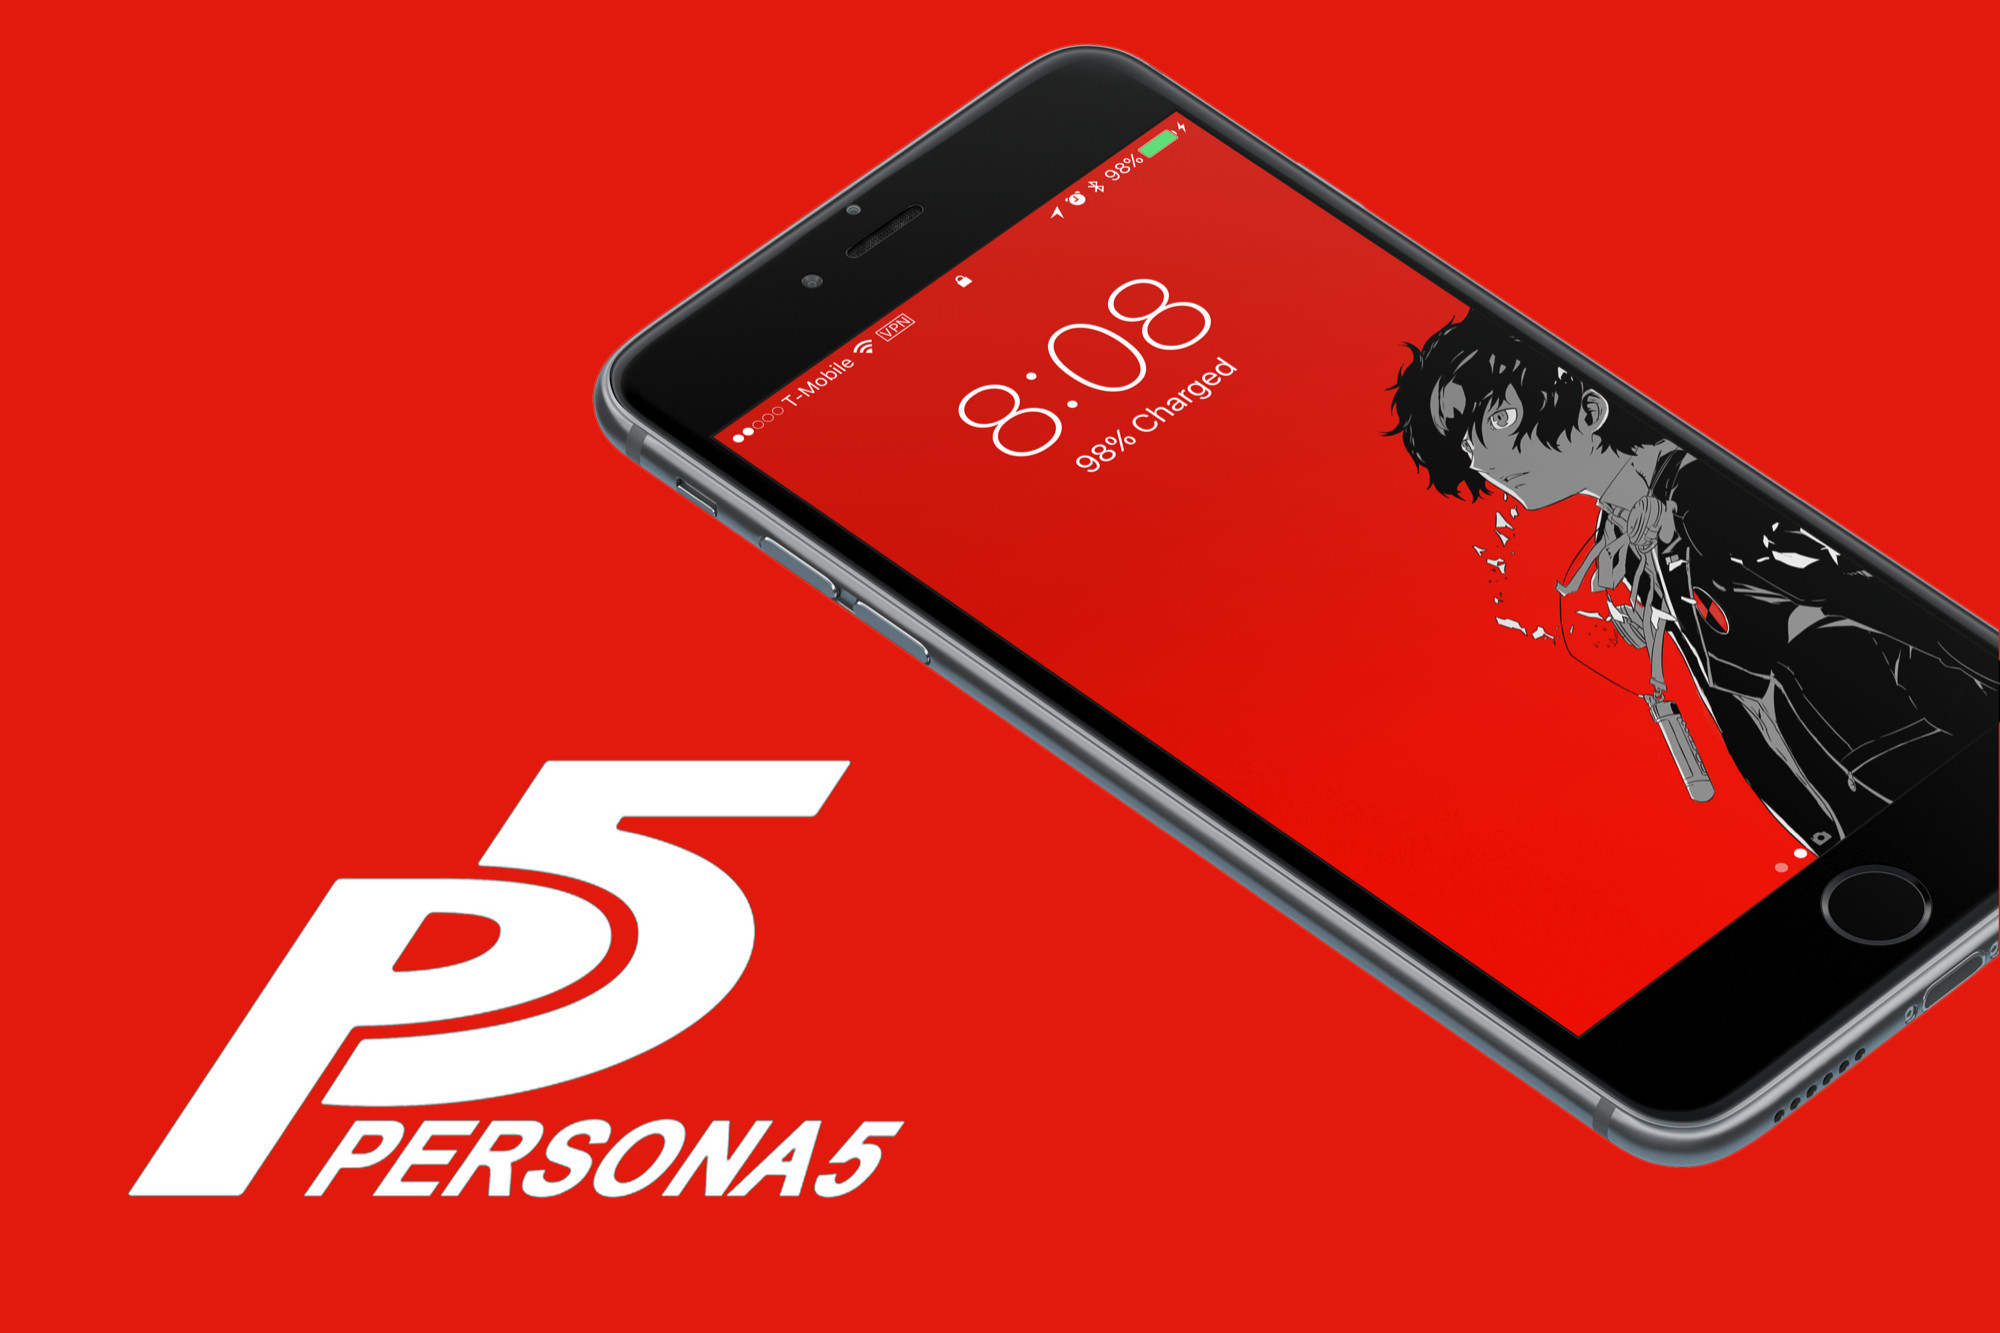 2000x1333 Persona 5 was released last week and it's a truly marvelous game that's  oozing with style. As I tend to do, I made a wallpaper for my phone to  bring a ...